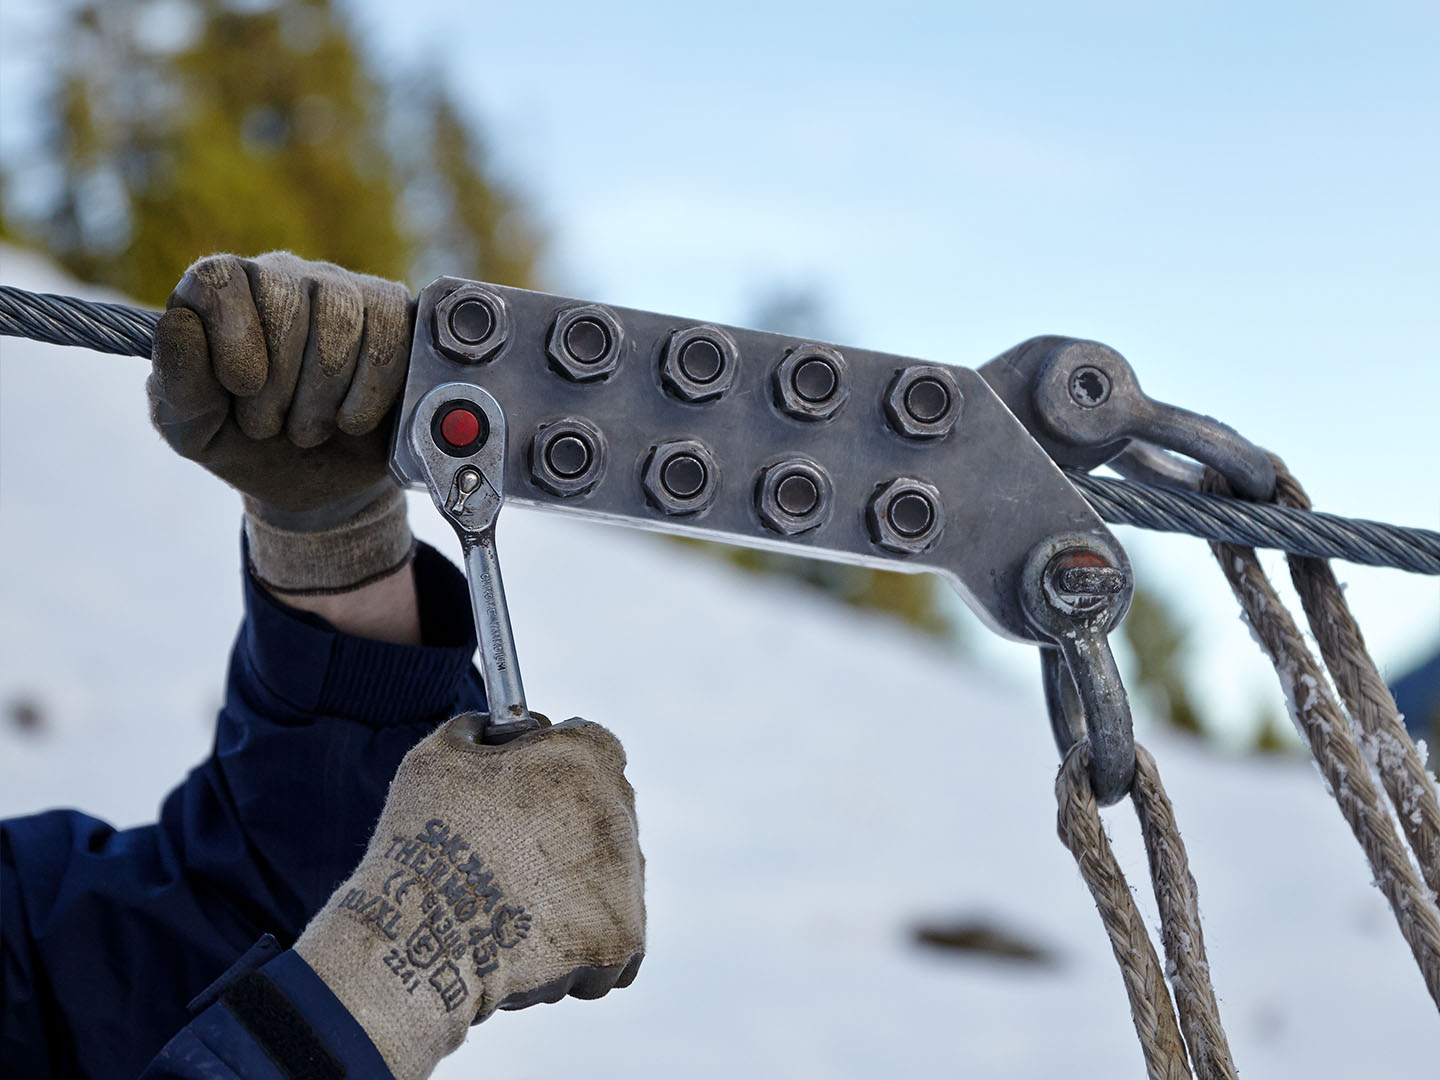 [Translate to Japan (JP), Japanese (Default):] Two hands in gloves of a worker on a snowy mountain adjusting a cable clamp 